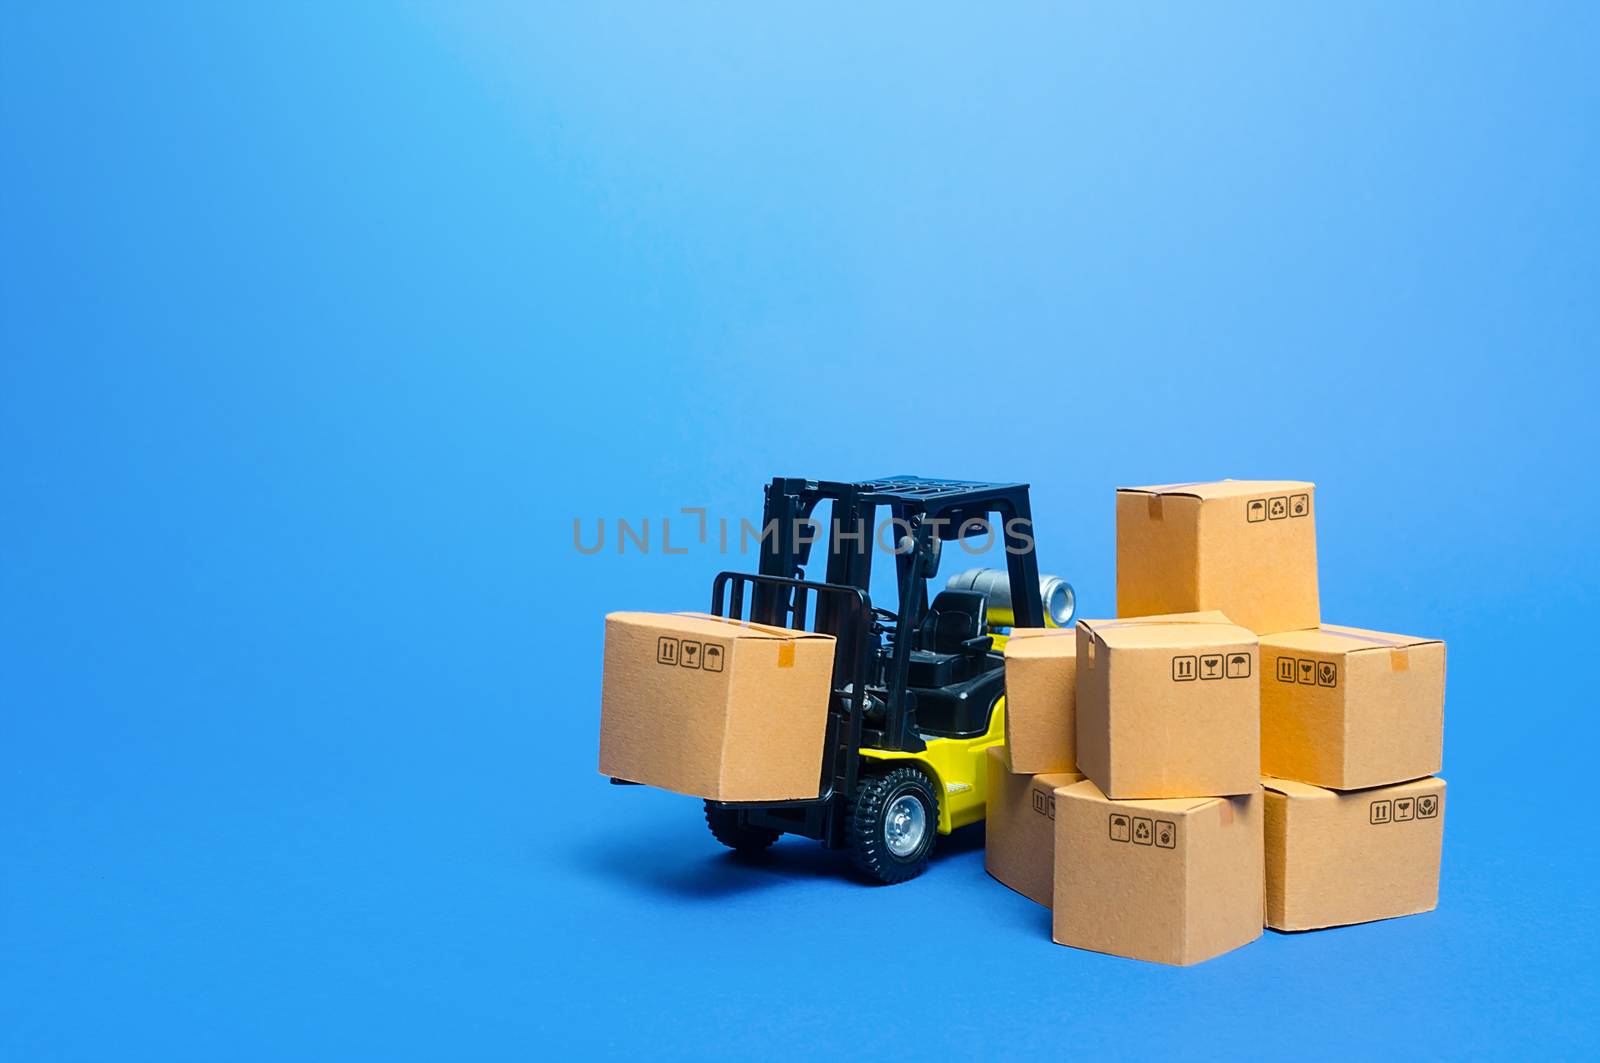 Forklift truck with cardboard boxes. Transportation logistics infrastructure, import and export goods and products delivery. Production, transport, cargo storage. Freight shipping. retail